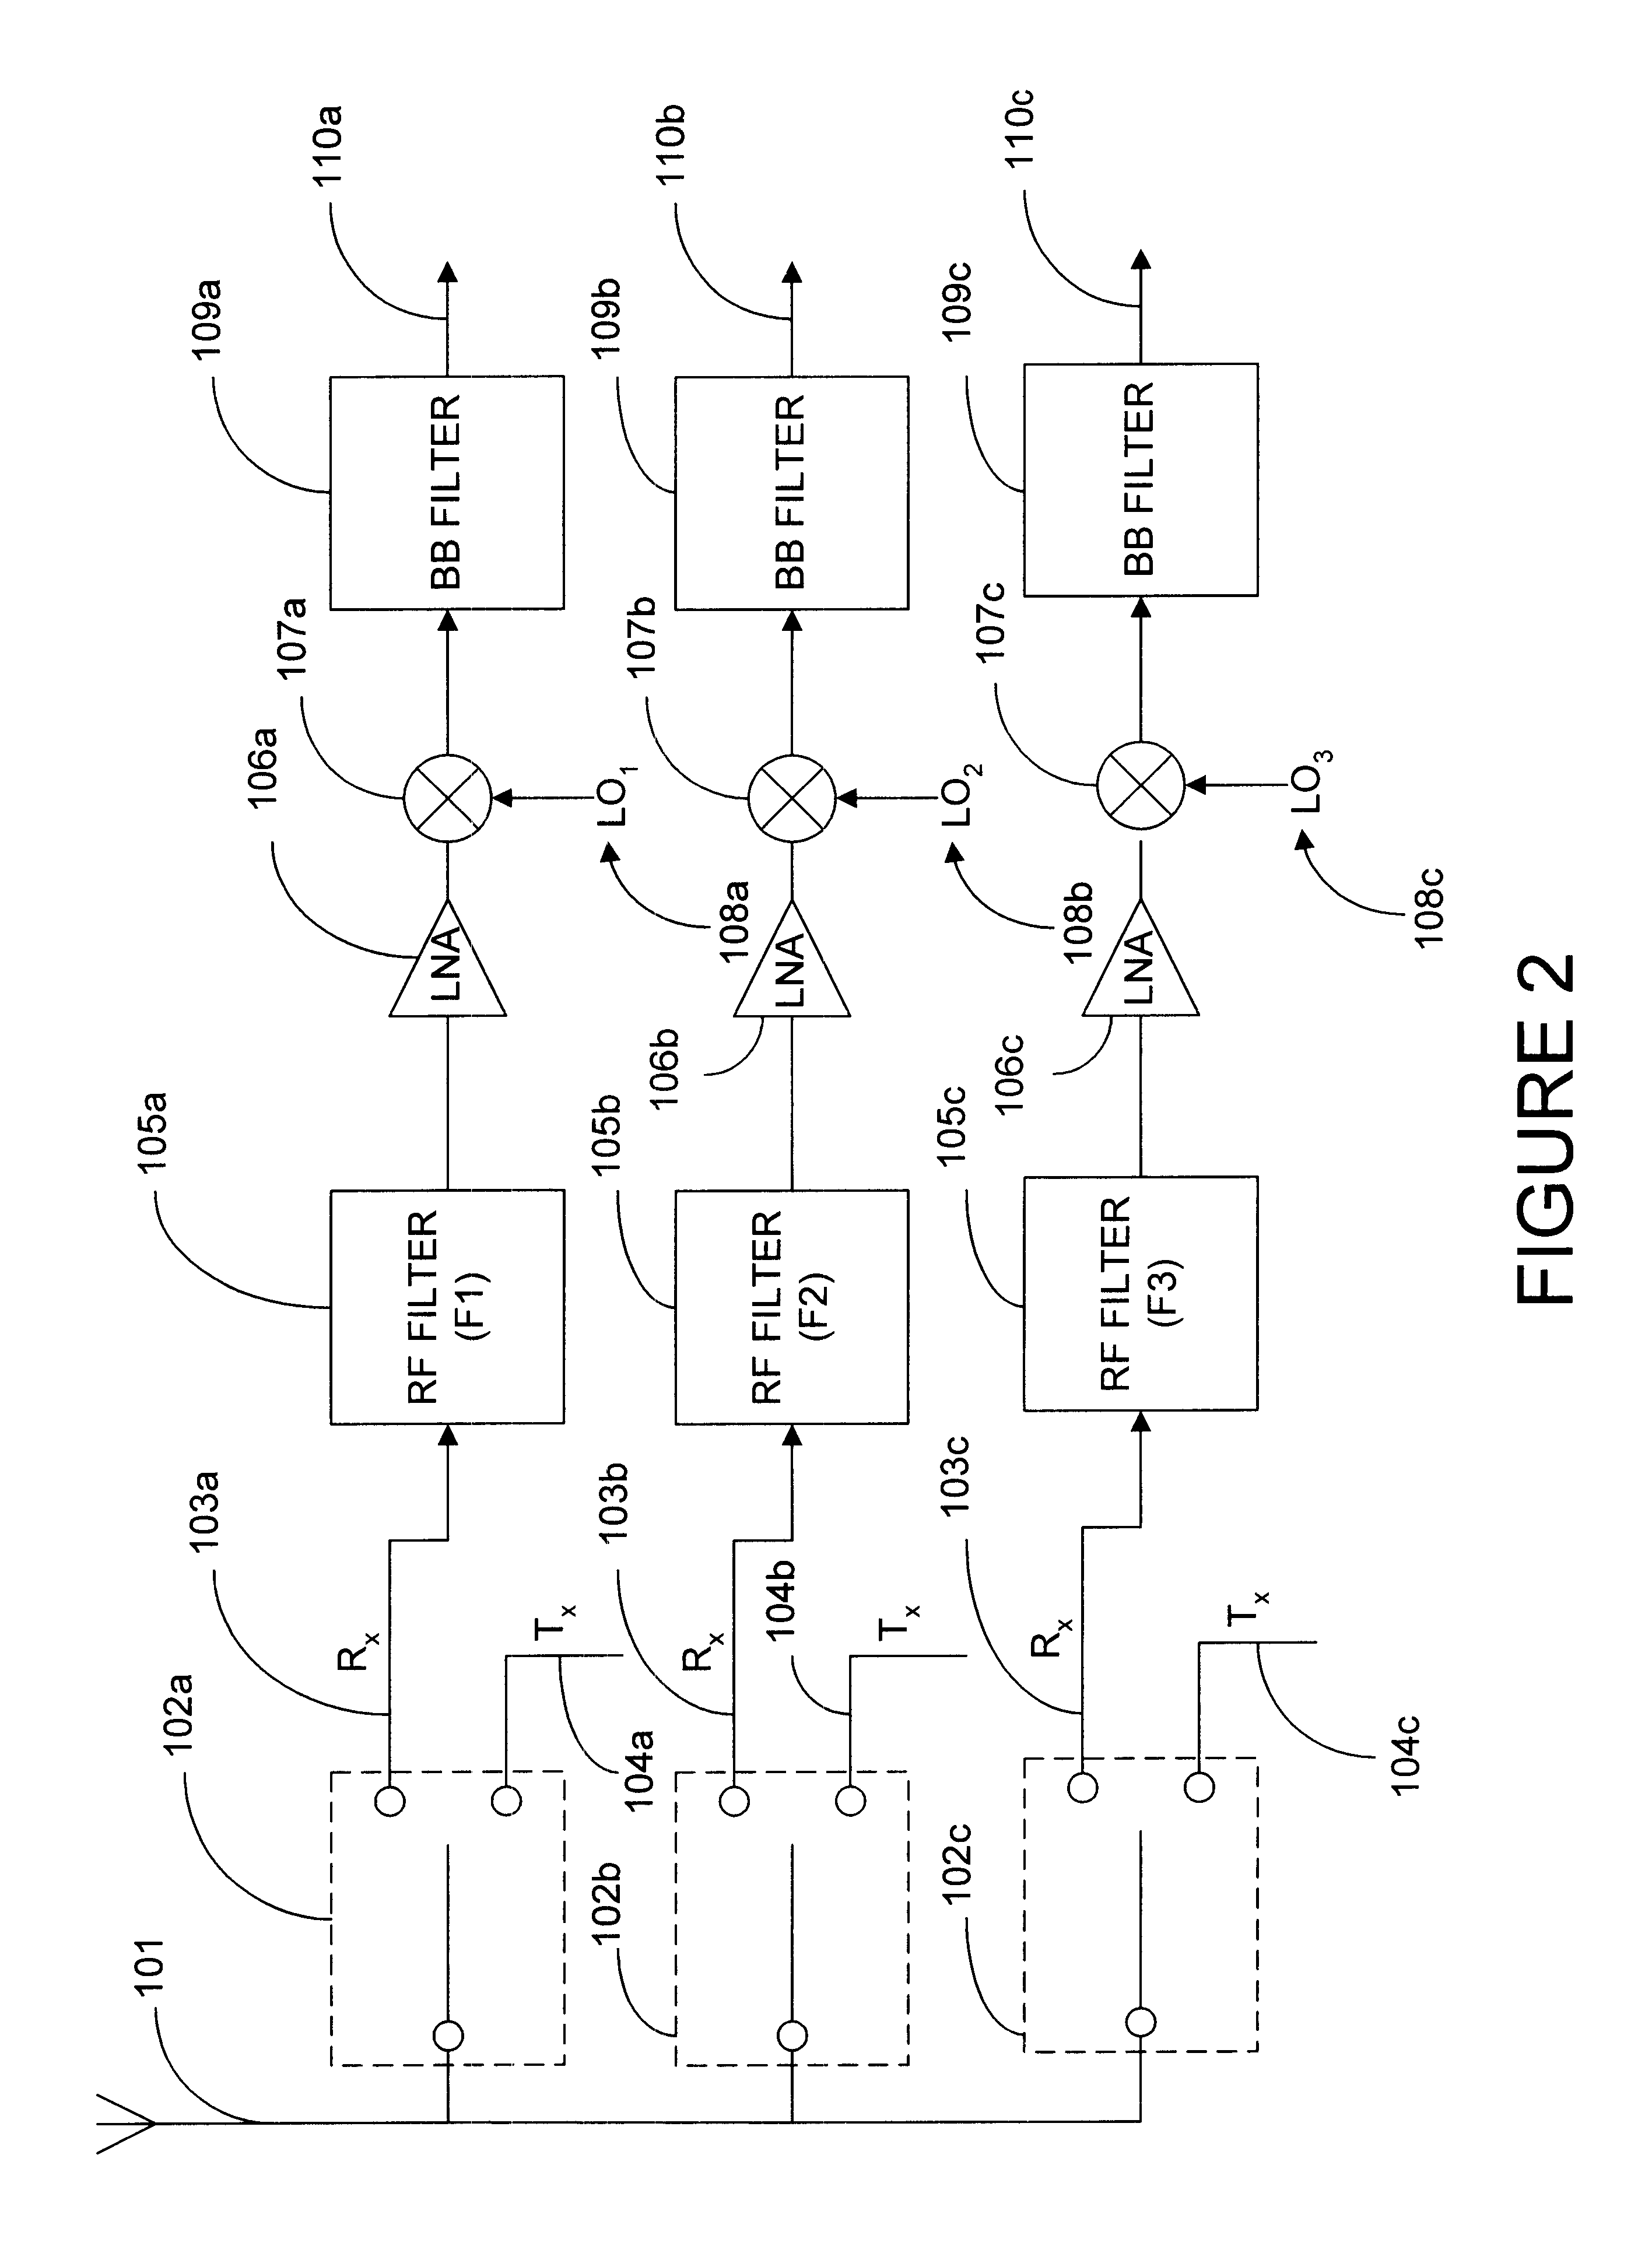 Multi-band filter system for wireless communication receiver